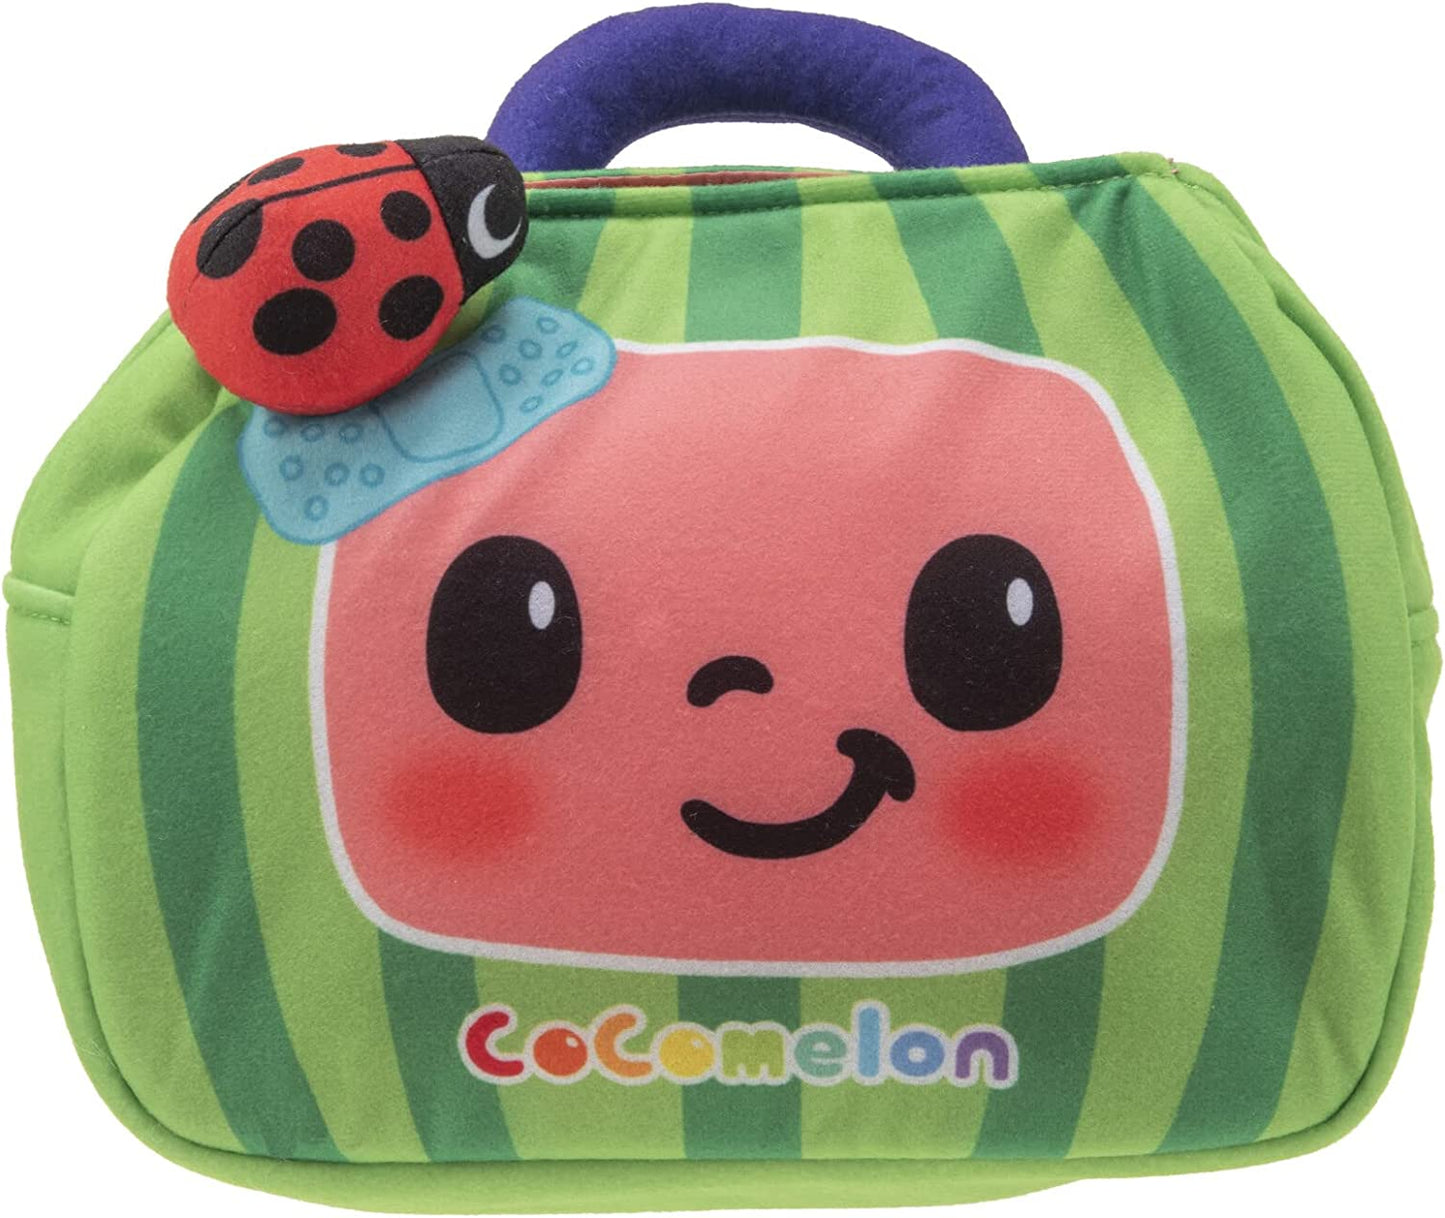 Cocomelon Boo Boo JJ Deluxe Feature Plush - Complete with Doctor Checkup Bag, Bandages, and Care Accessories for JJ - Includes 9 Total Accessories - Exclusively on Amazon"